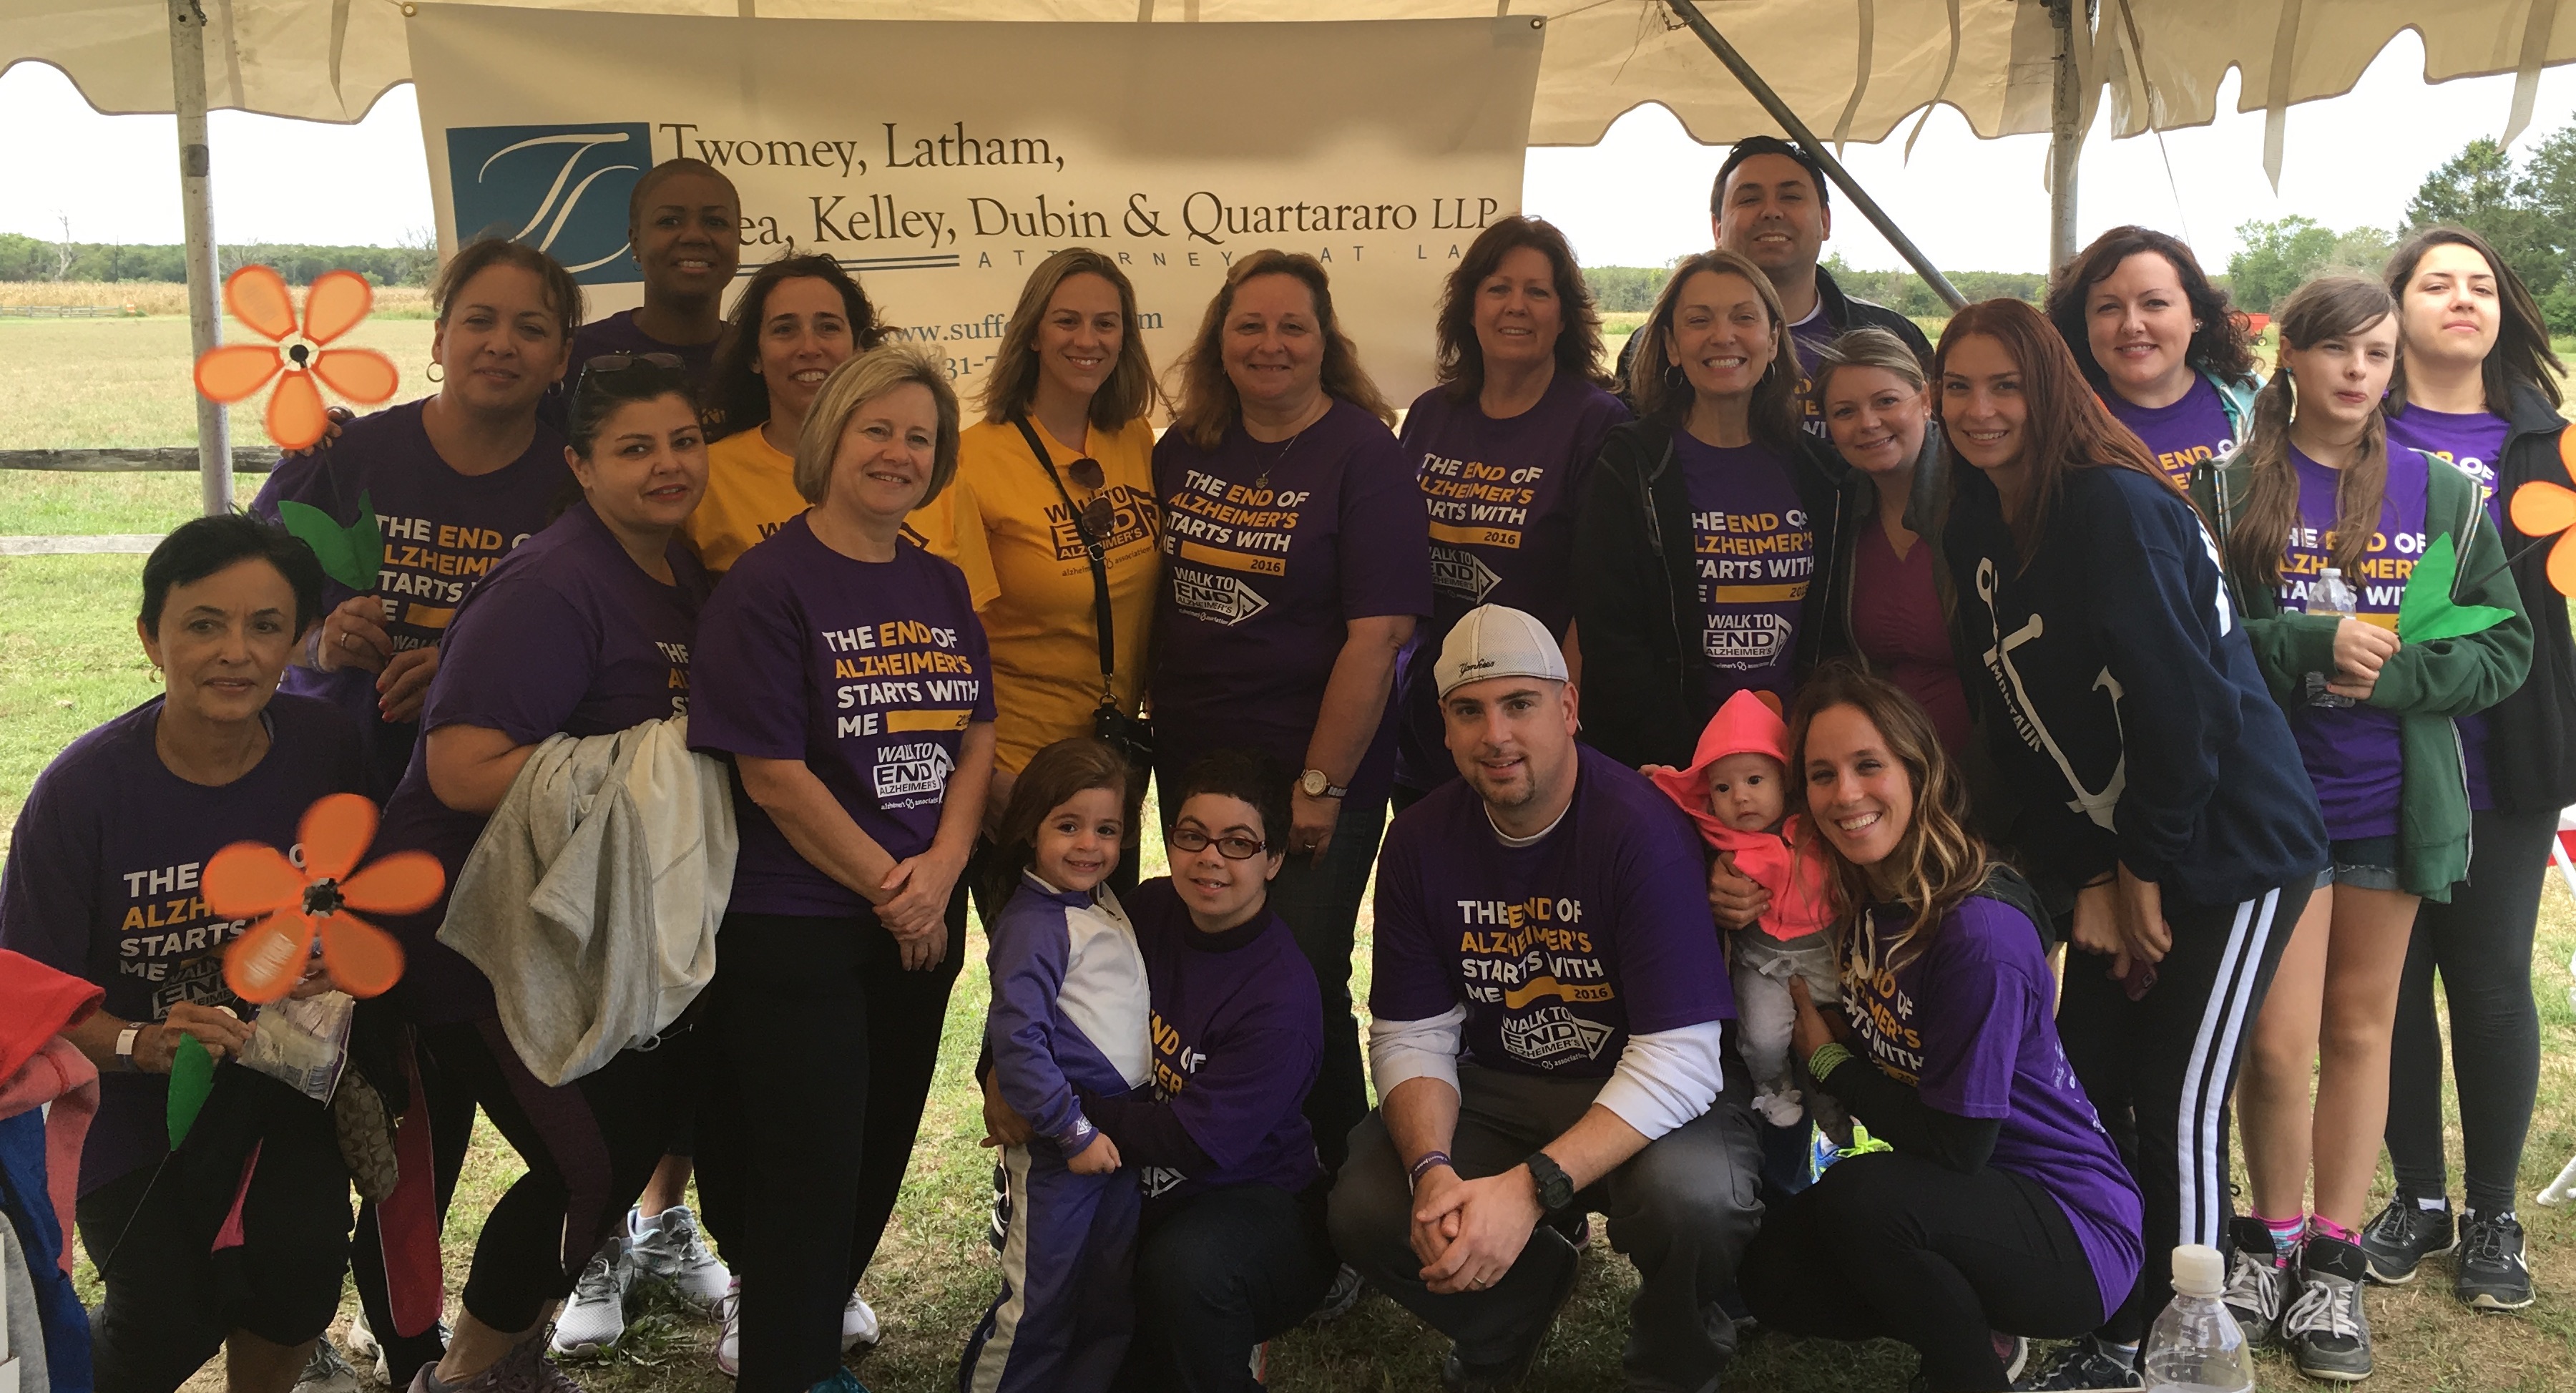 2016 Walk to End Alzheimers Twomey Latham legal team friends and family